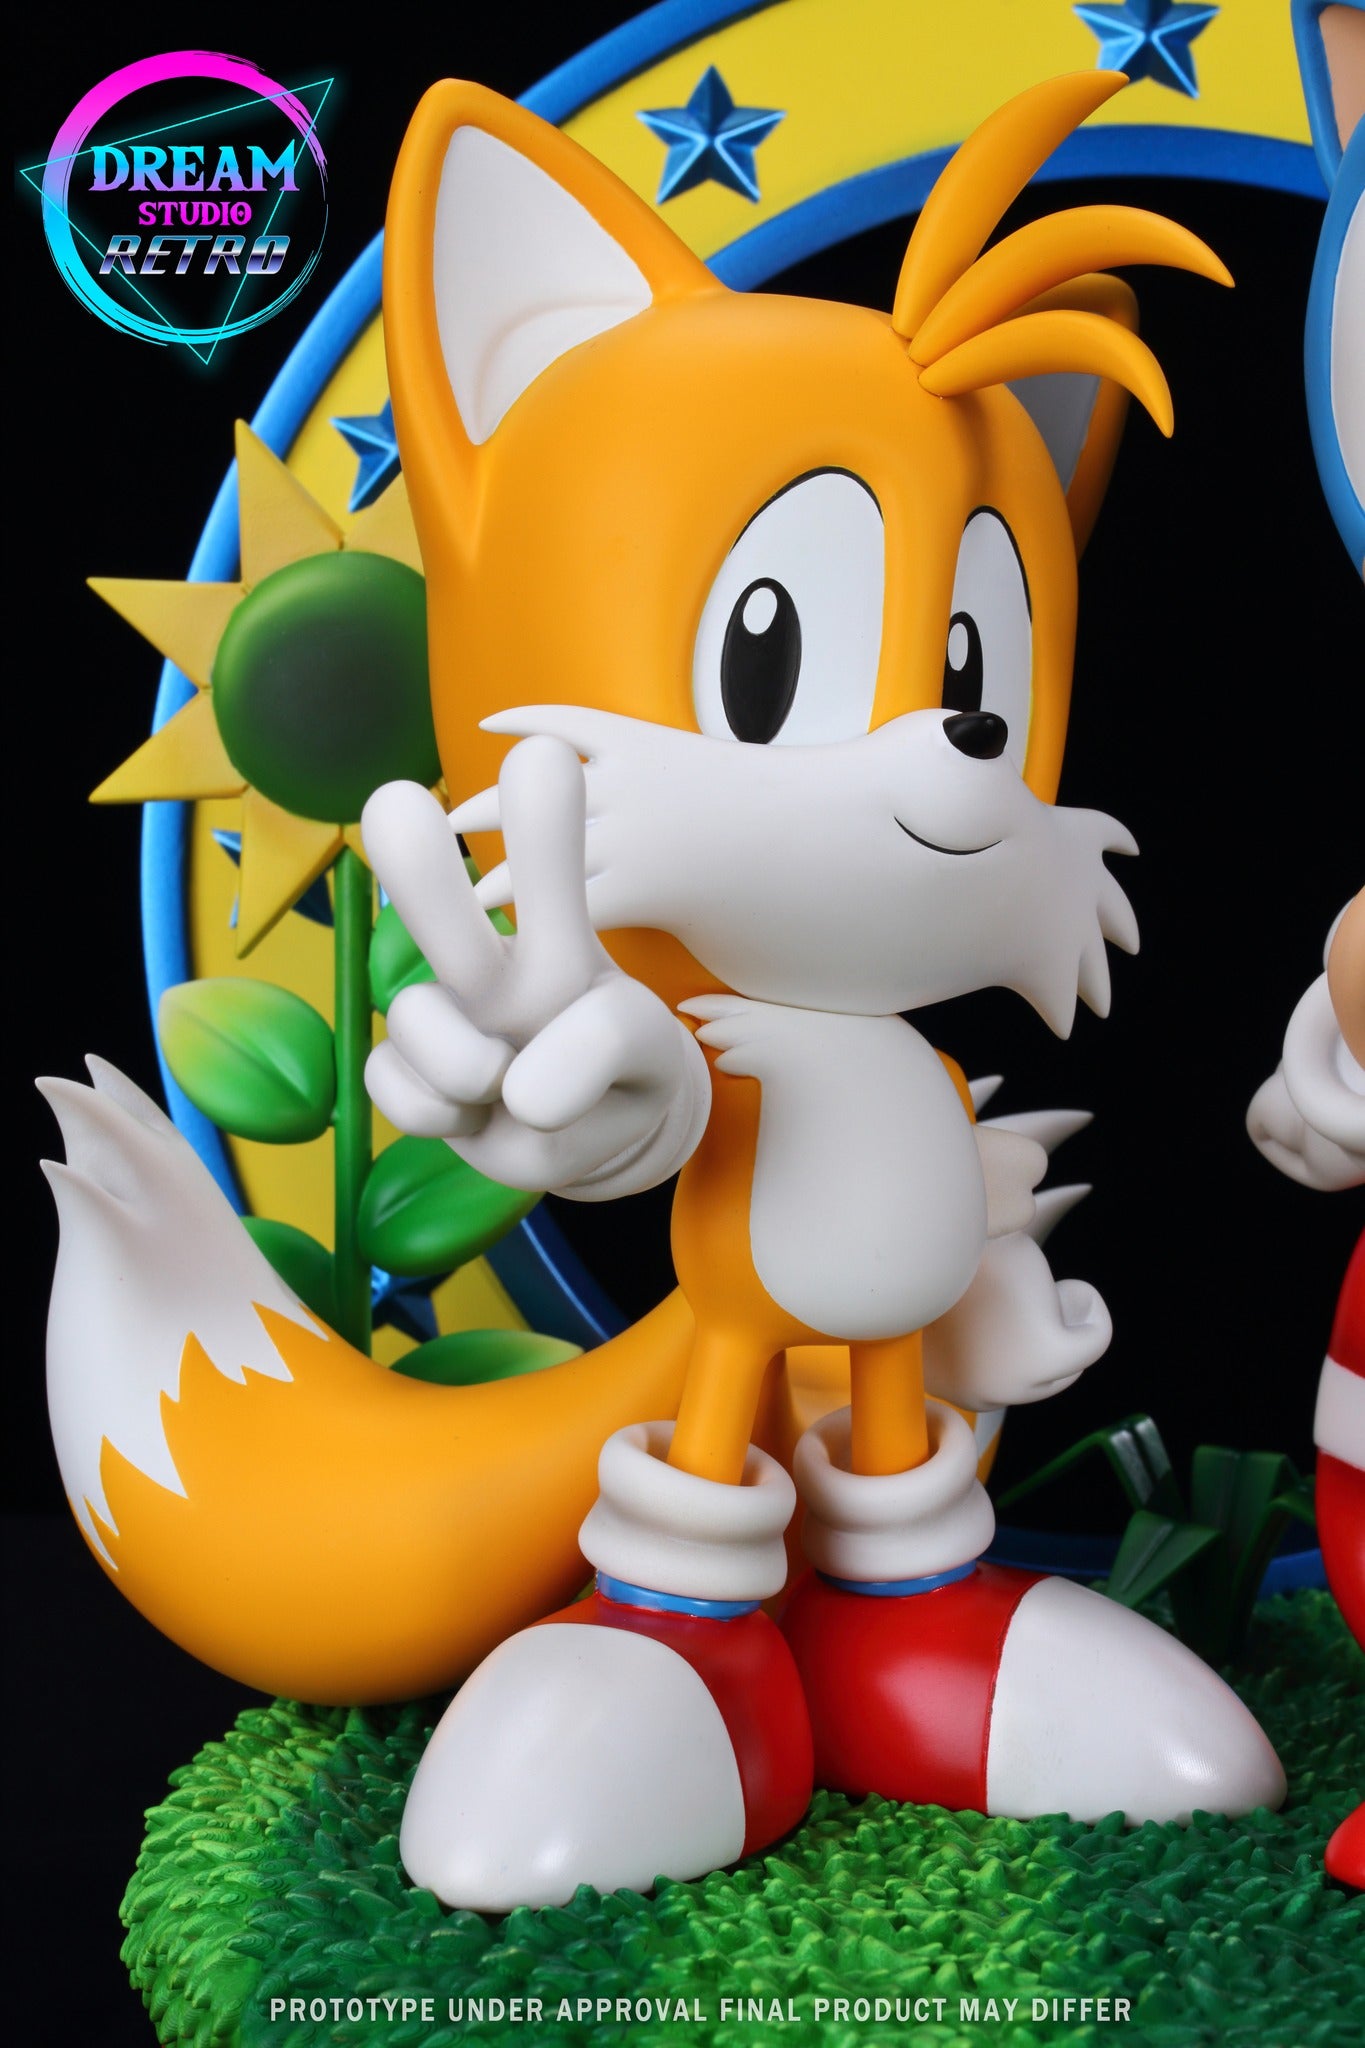 Dream - Sonic the Hedgehog and Tails